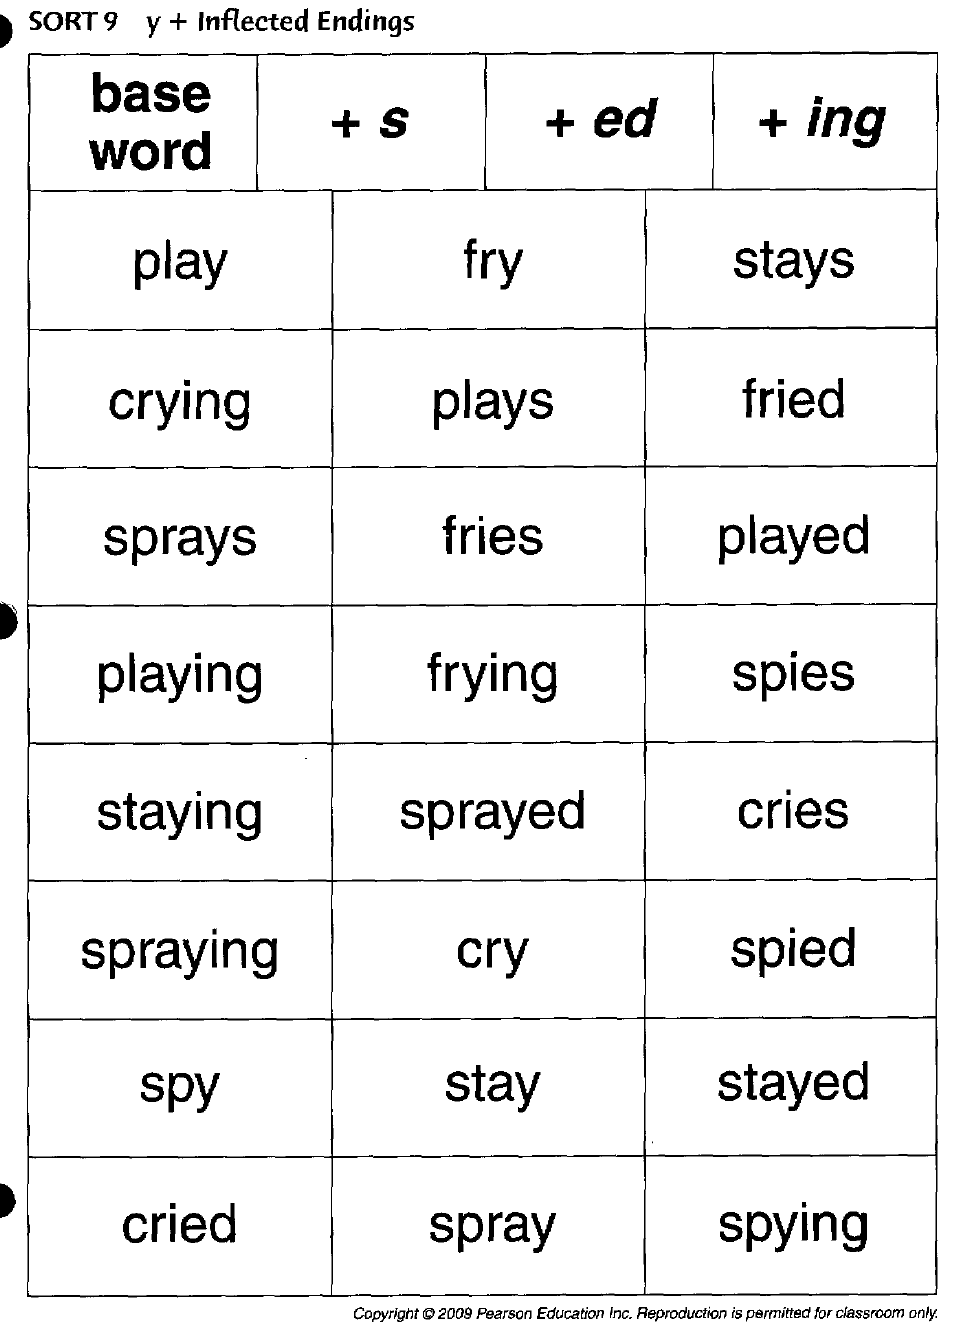 mrs-bailey-s-class-web-connection-spelling-lists